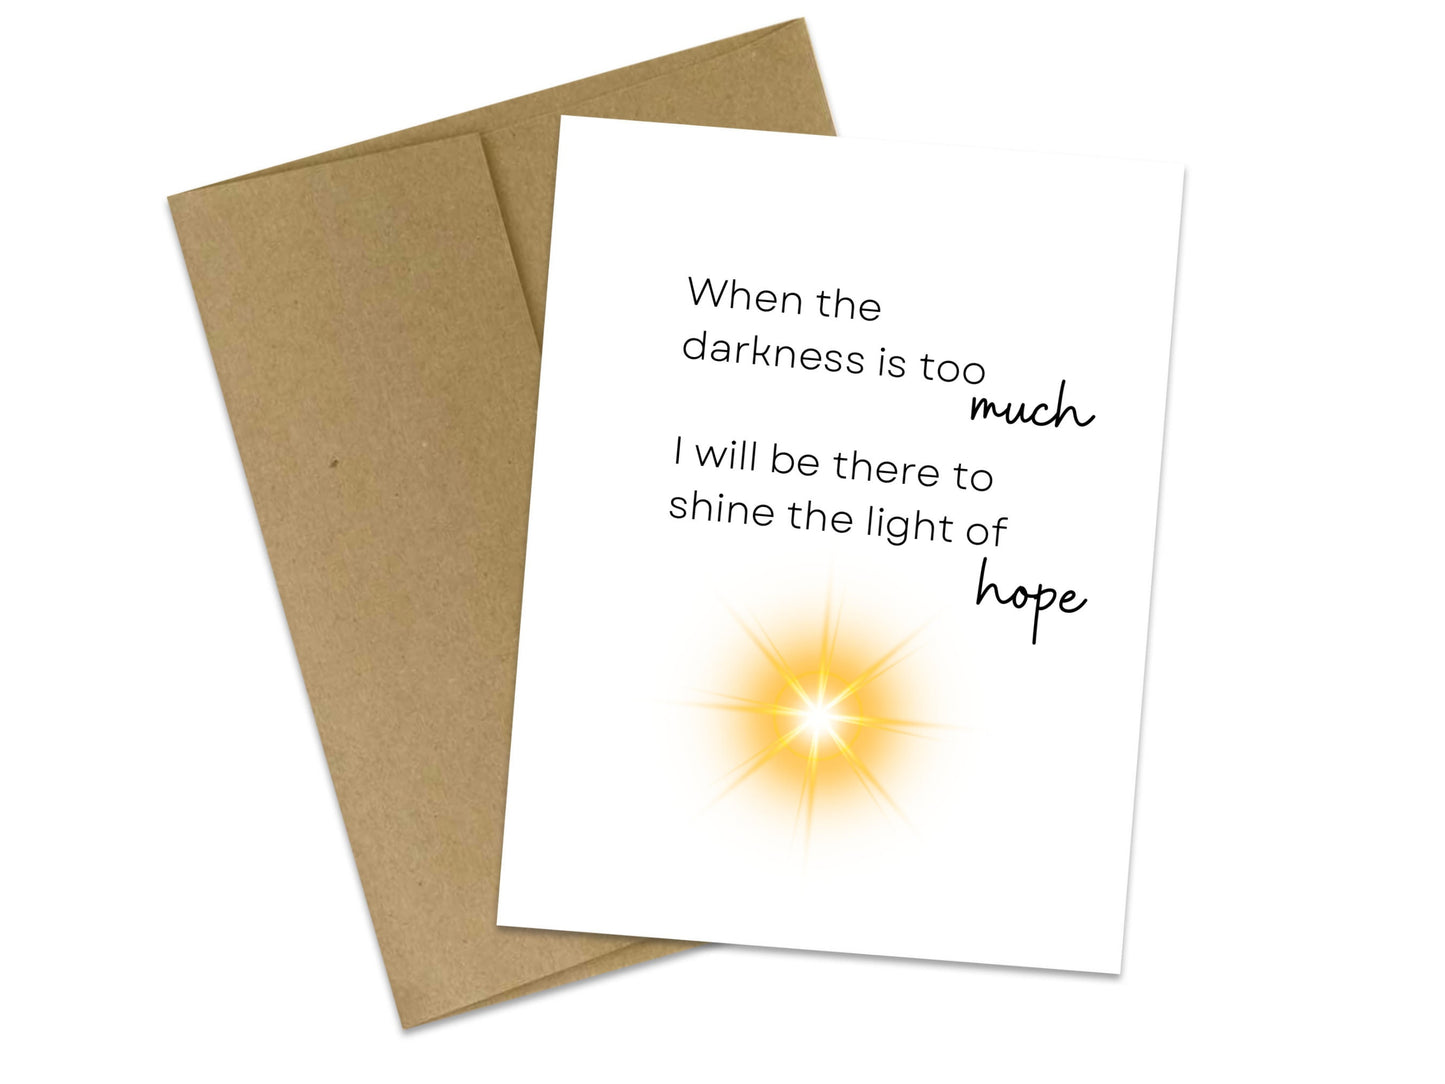 When the darkness is too much, I will be there to shine the light of hope